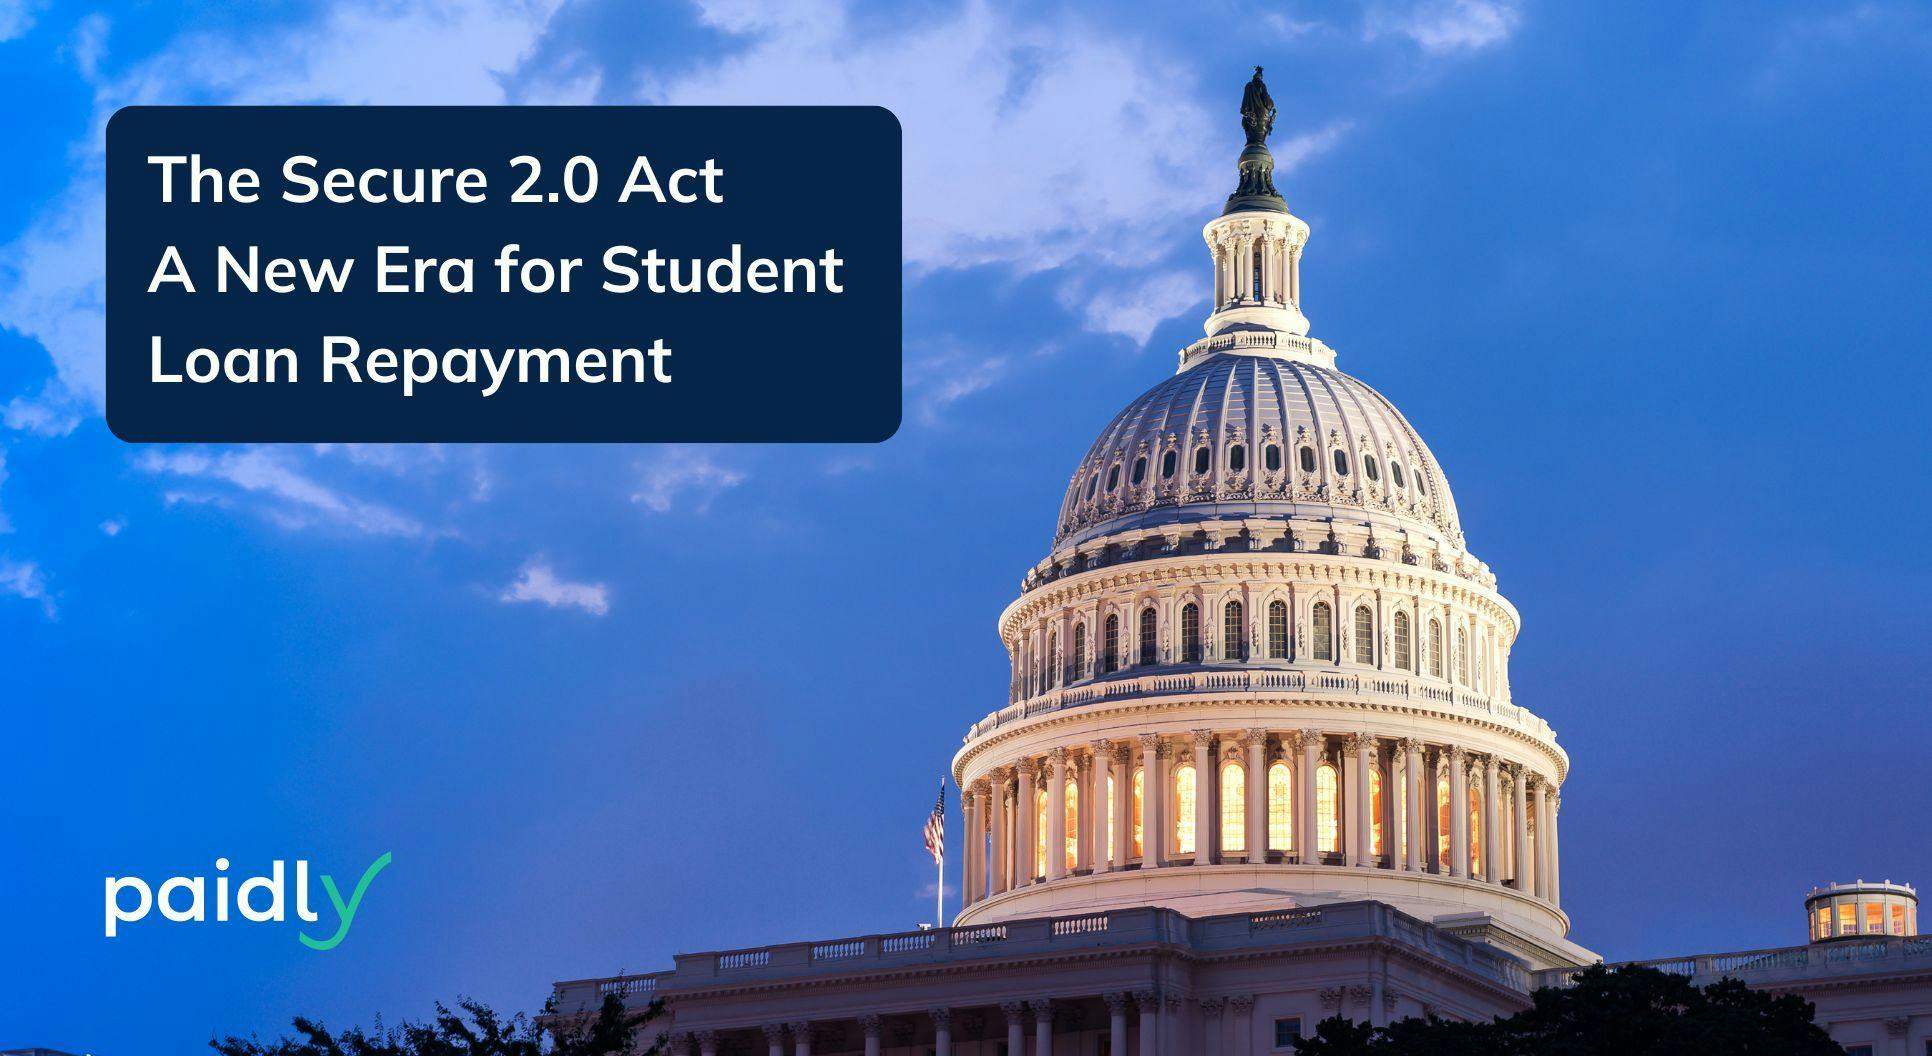 United States Capital with a message The Secure 2.0 Act A new Era for Student Loan Repayment